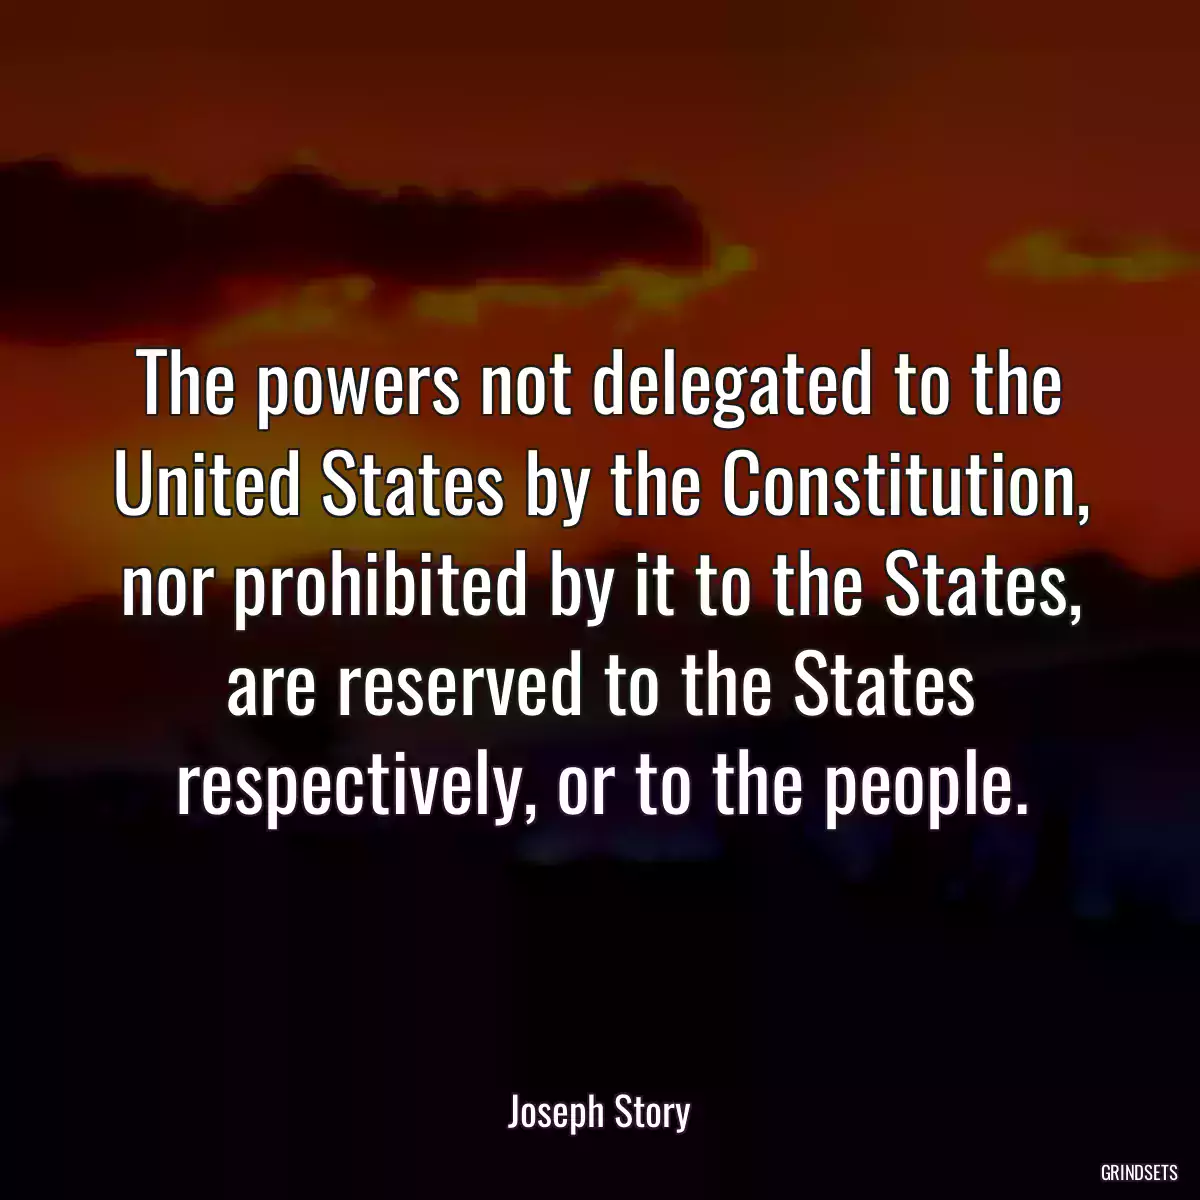 The powers not delegated to the United States by the Constitution, nor prohibited by it to the States, are reserved to the States respectively, or to the people.